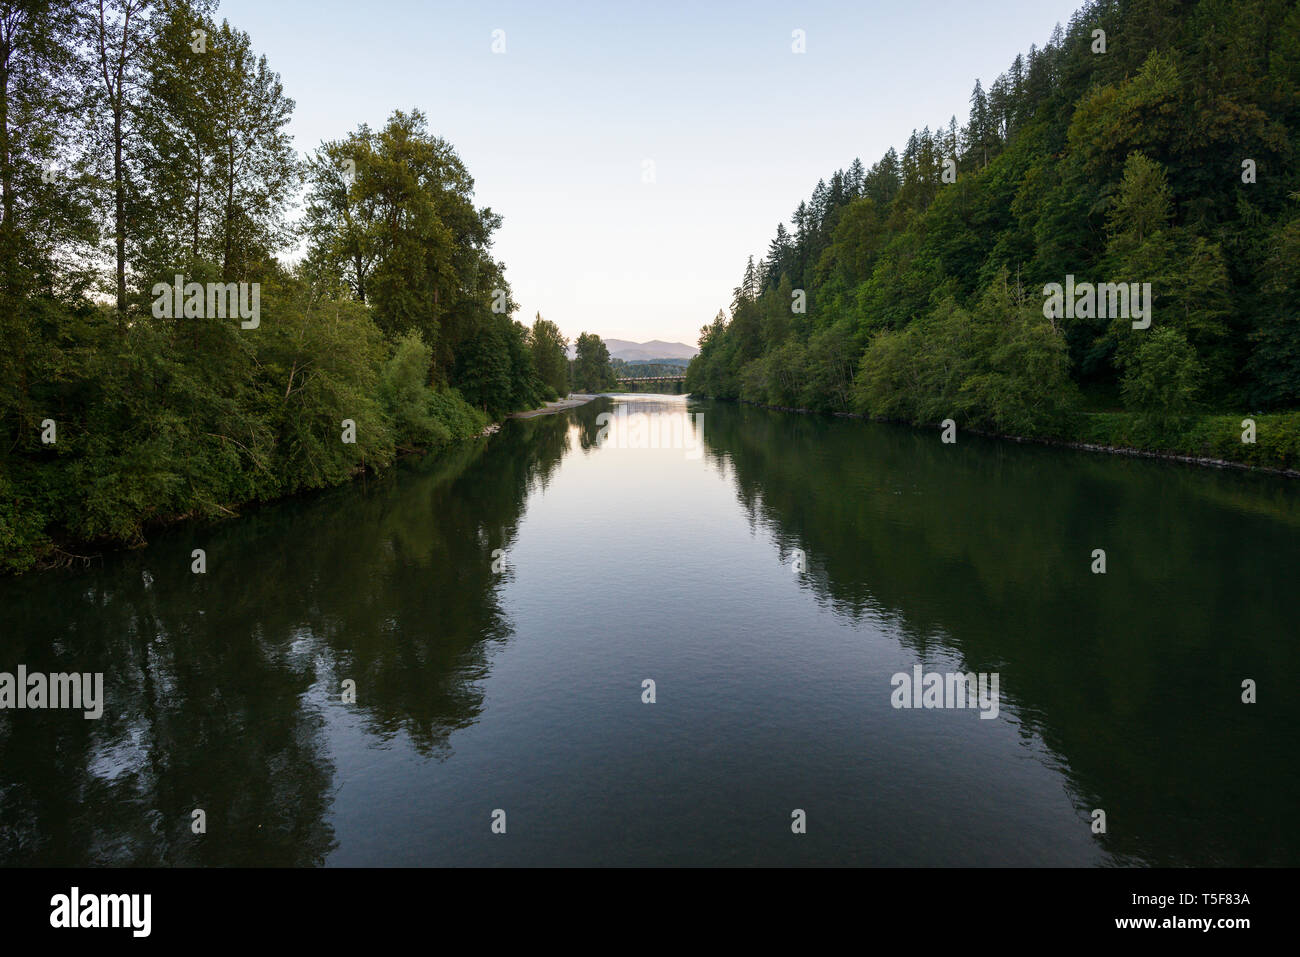 Serene Calm River Lined With Trees Stock Photo